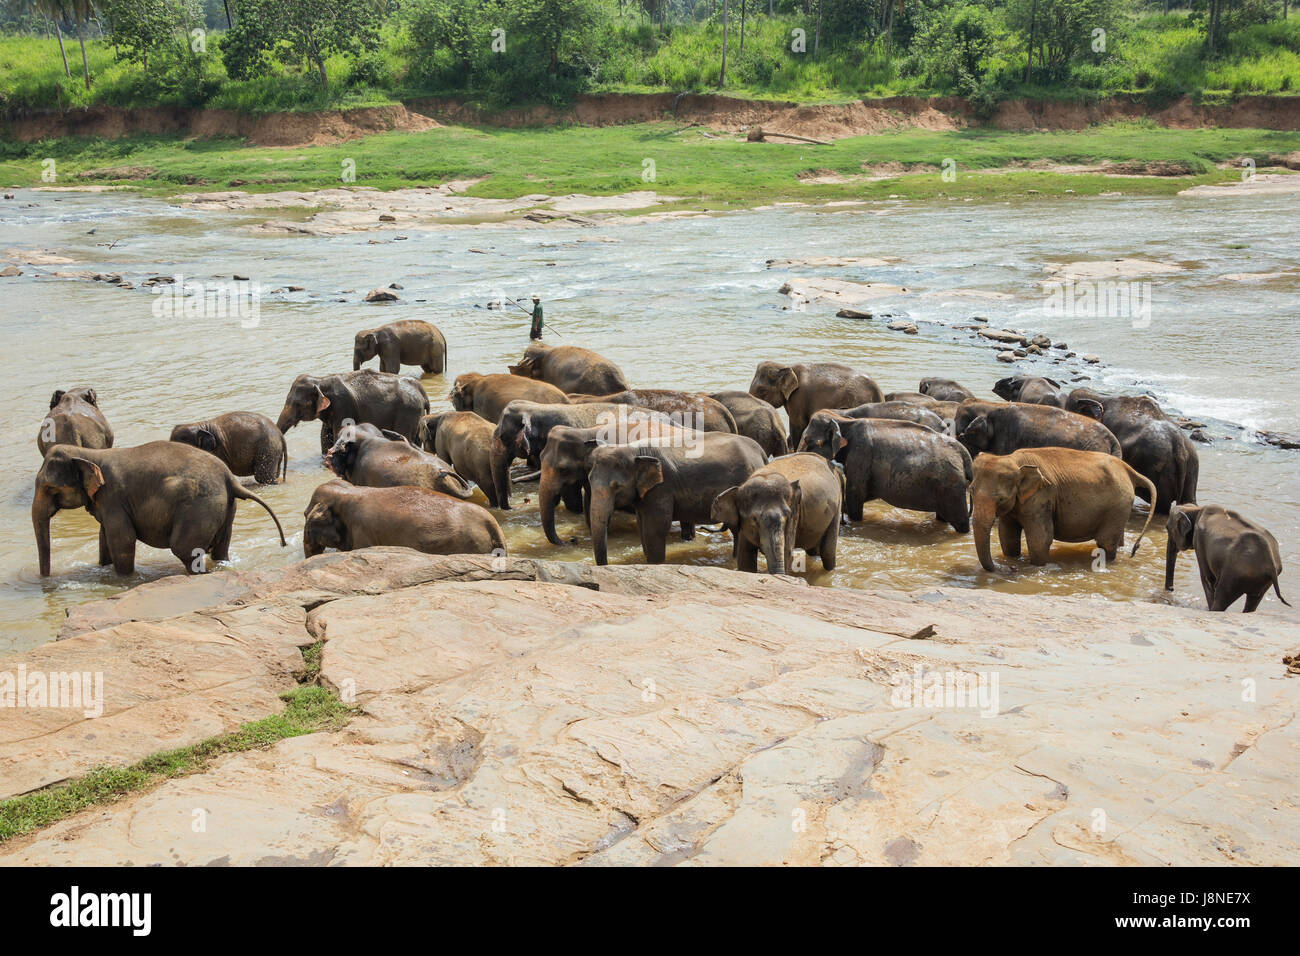 Editorial: PINNAWALA, SRI LANKA, April 7, 2017 - Elephant herd bathing in the river, supervised by an animal keeper Stock Photo